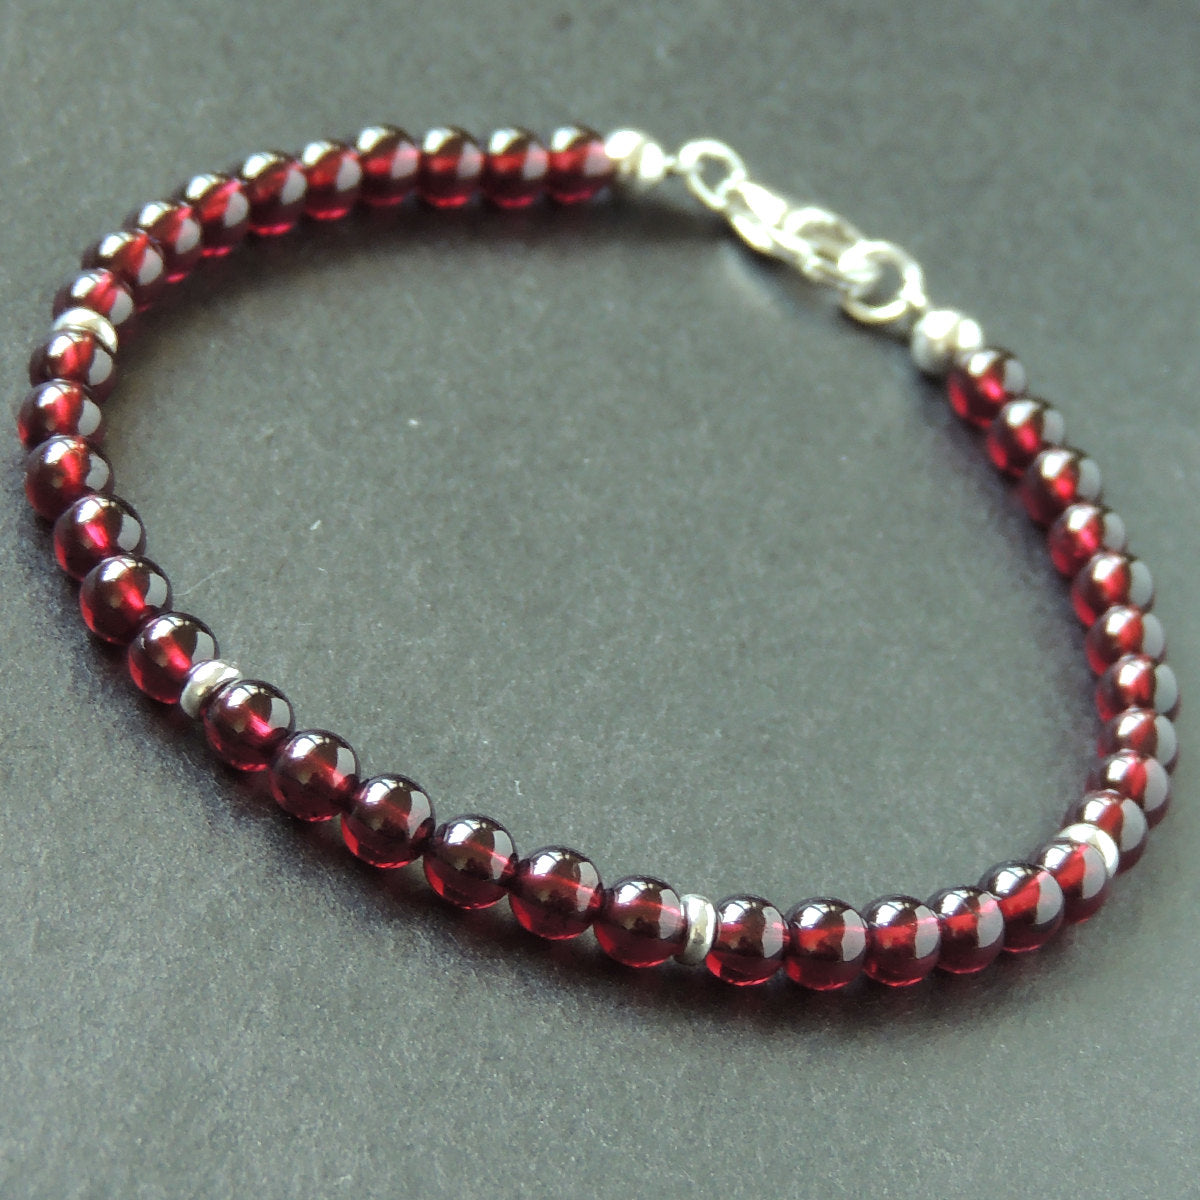 4.5mm Grade AAA Garnet Healing Gemstone Bracelet with S925 Sterling Silver Spacer Beads & Clasp - Handmade by Gem & Silver BR641